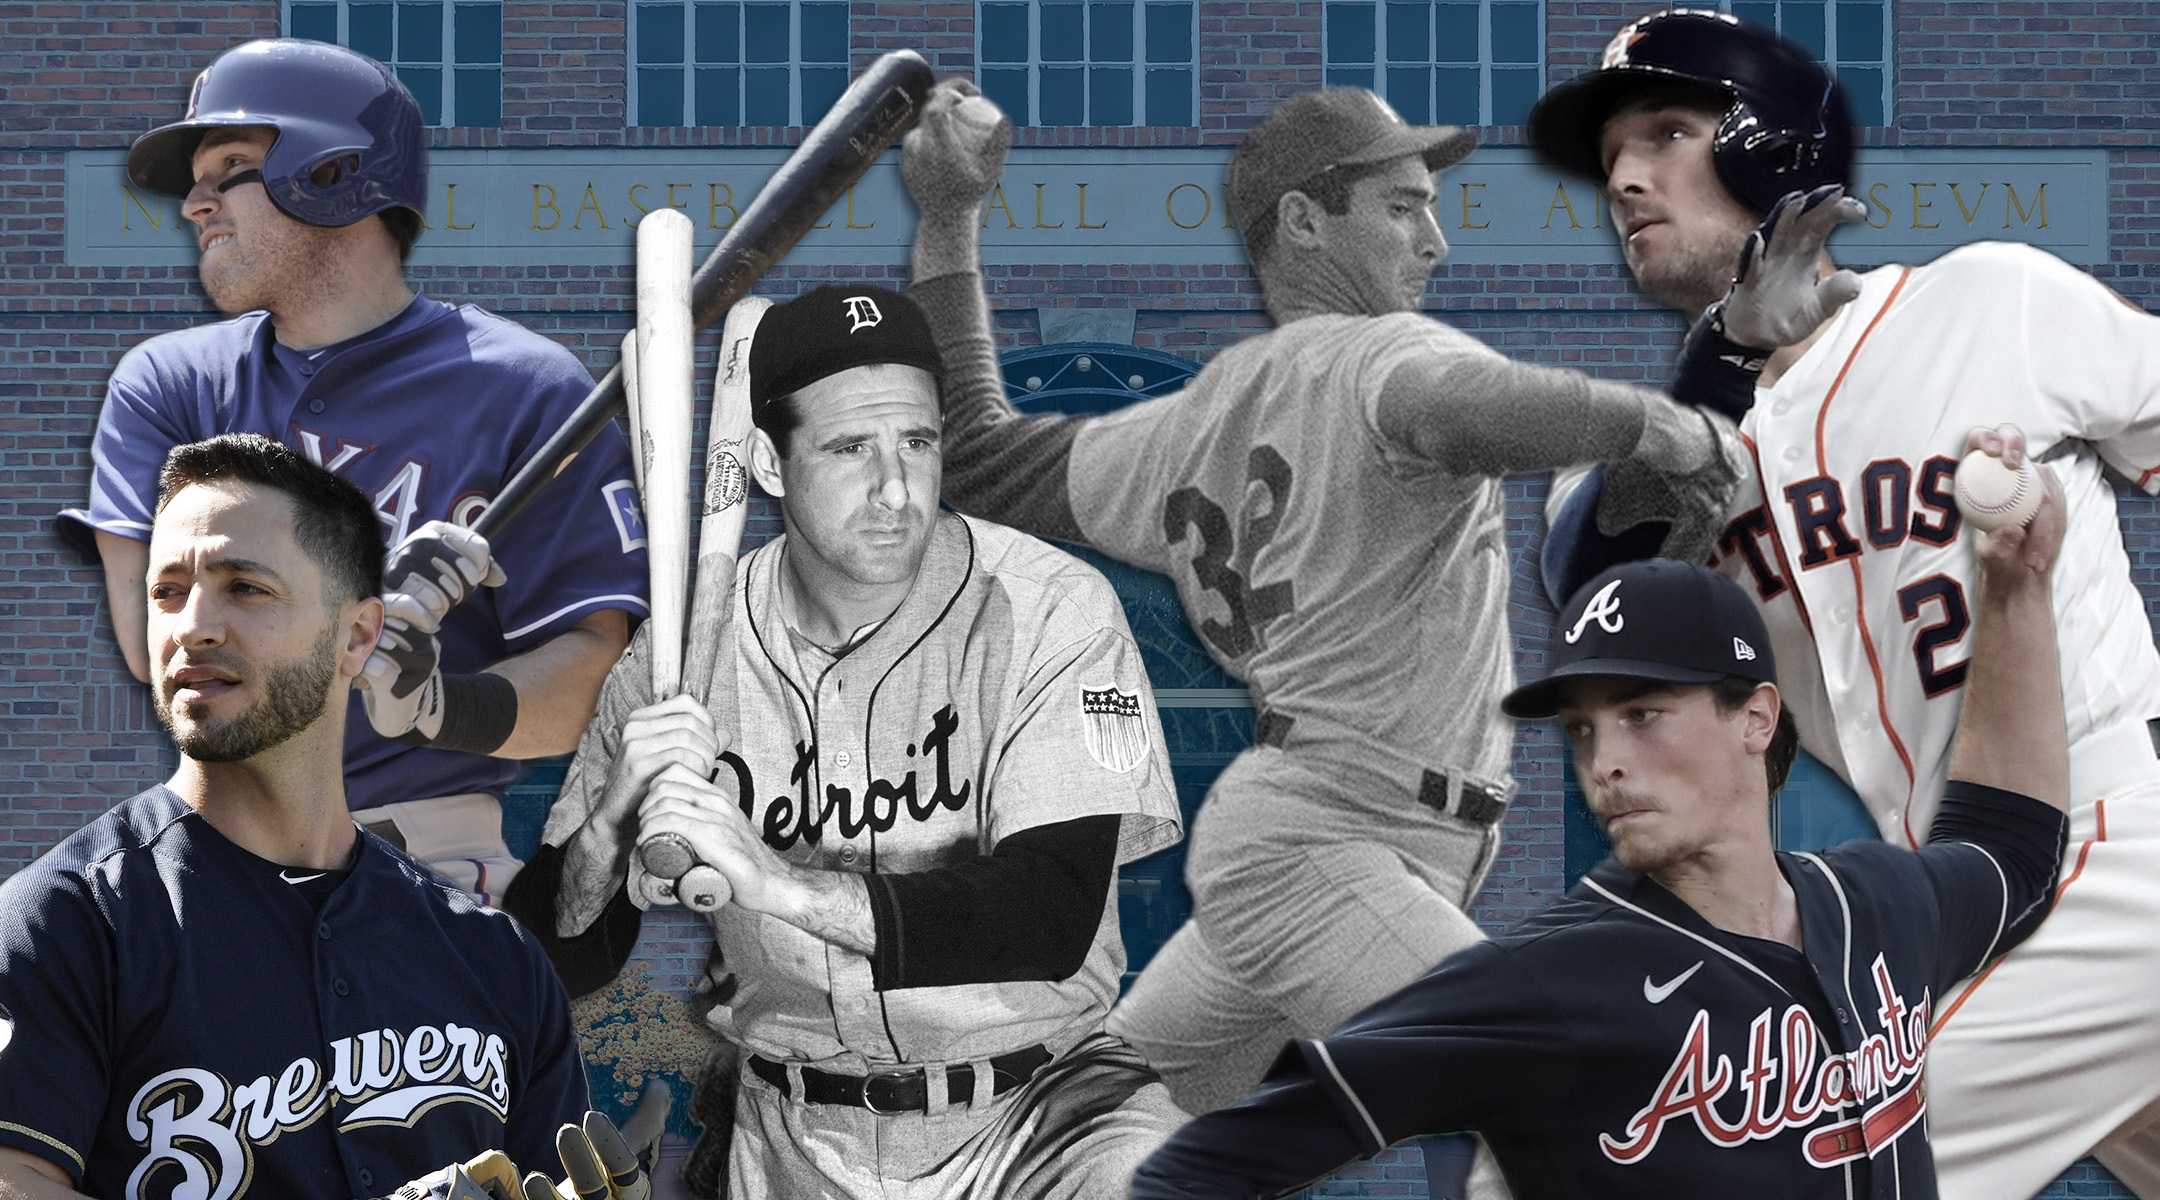 From left to right: Ryan Braun, Ian Kinsler, Hank Greenberg, Sandy Koufax, Max Fried and Alex Bregman (Getty Images; Design by Mollie Suss)